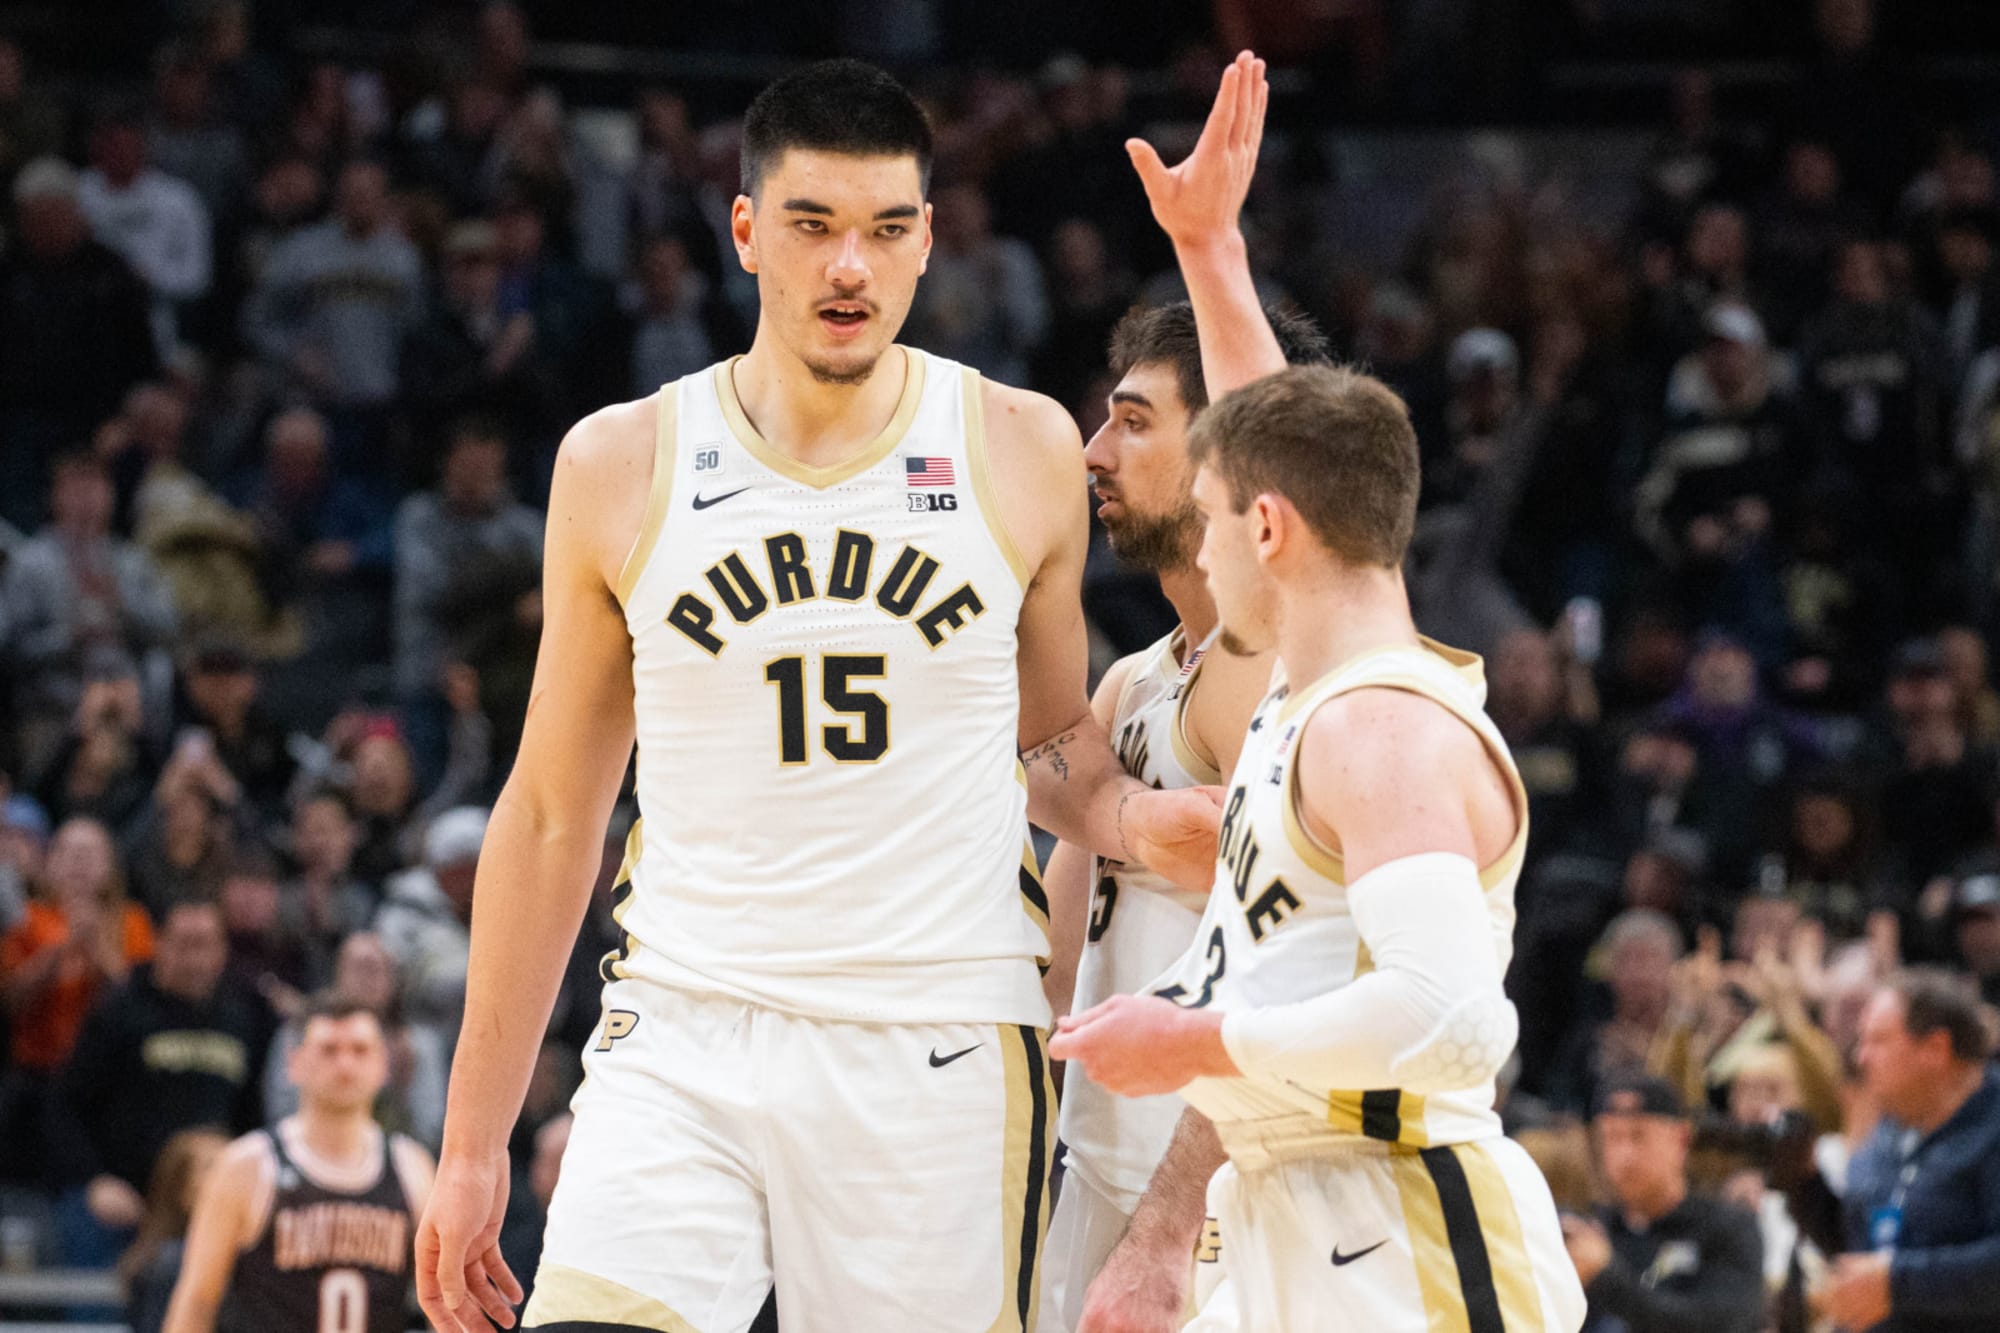 Purdue vs. Michigan State prediction and odds for Monday, January 16 (Edey, Boilermakers overwhelm Sparty) thumbnail